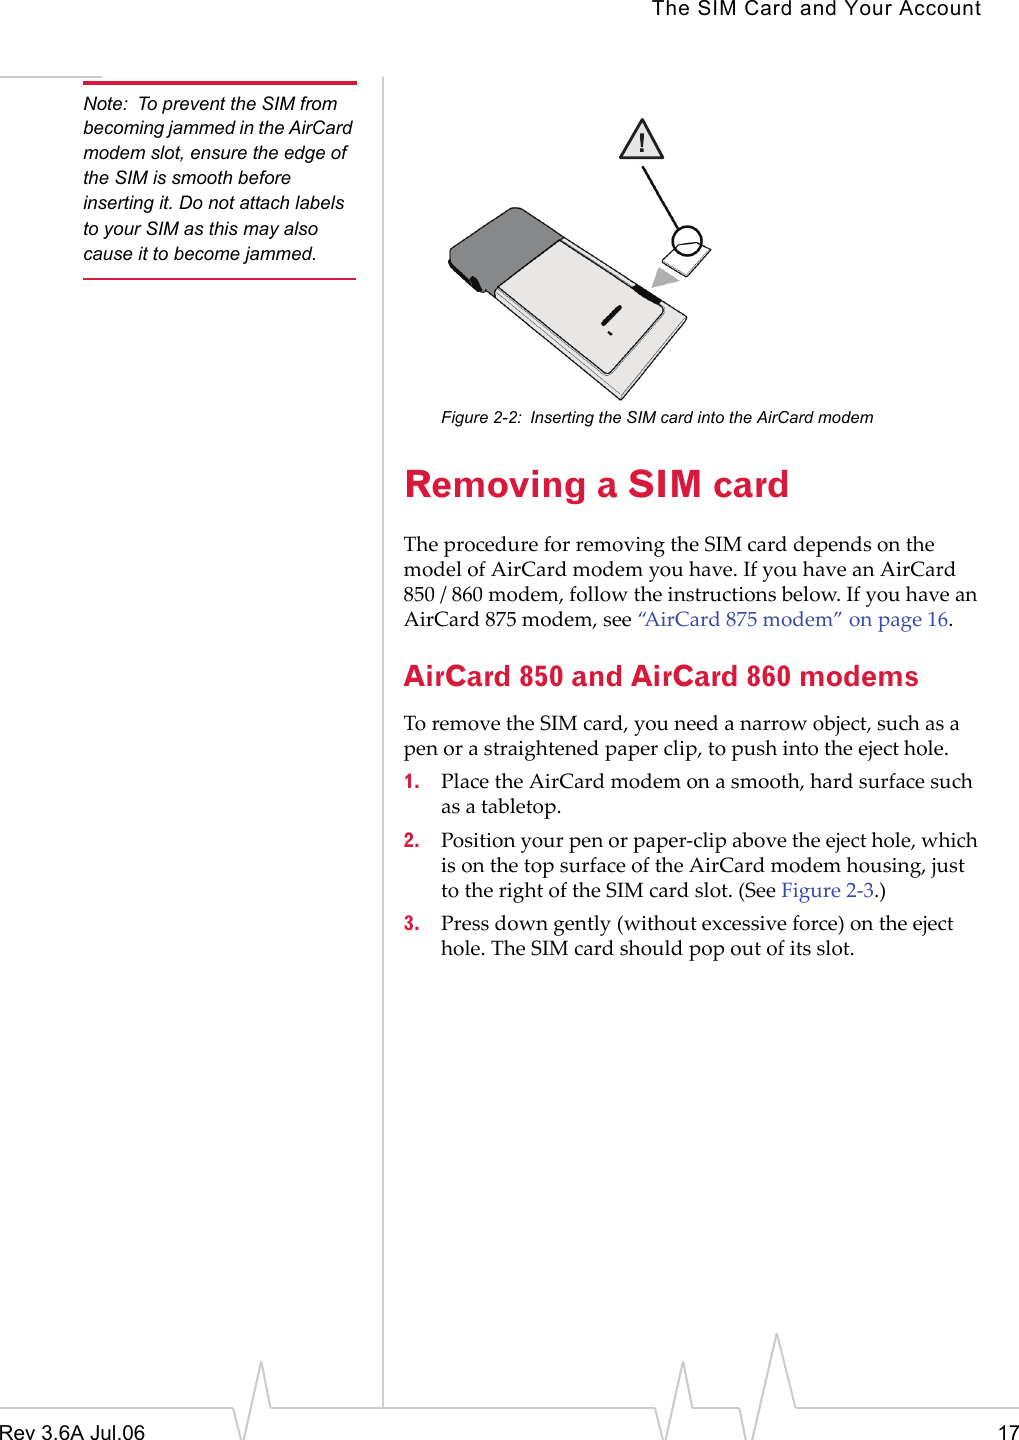 The SIM Card and Your AccountRev 3.6A Jul.06 17Note: To prevent the SIM from becoming jammed in the AirCard modem slot, ensure the edge of the SIM is smooth before inserting it. Do not attach labels to your SIM as this may also cause it to become jammed.Figure 2-2: Inserting the SIM card into the AirCard modemRemoving a SIM cardThe procedure for removing the SIM card depends on the model of AirCard modem you have. If you have an AirCard 850 / 860 modem, follow the instructions below. If you have an AirCard 875 modem, see “AirCard 875 modem” on page 16.AirCard 850 and AirCard 860 modemsTo remove the SIM card, you need a narrow object, such as a pen or a straightened paper clip, to push into the eject hole.1. Place the AirCard modem on a smooth, hard surface such as a tabletop.2. Position your pen or paper-clip above the eject hole, which is on the top surface of the AirCard modem housing, just to the right of the SIM card slot. (See Figure 2-3.)3. Press down gently (without excessive force) on the eject hole. The SIM card should pop out of its slot.